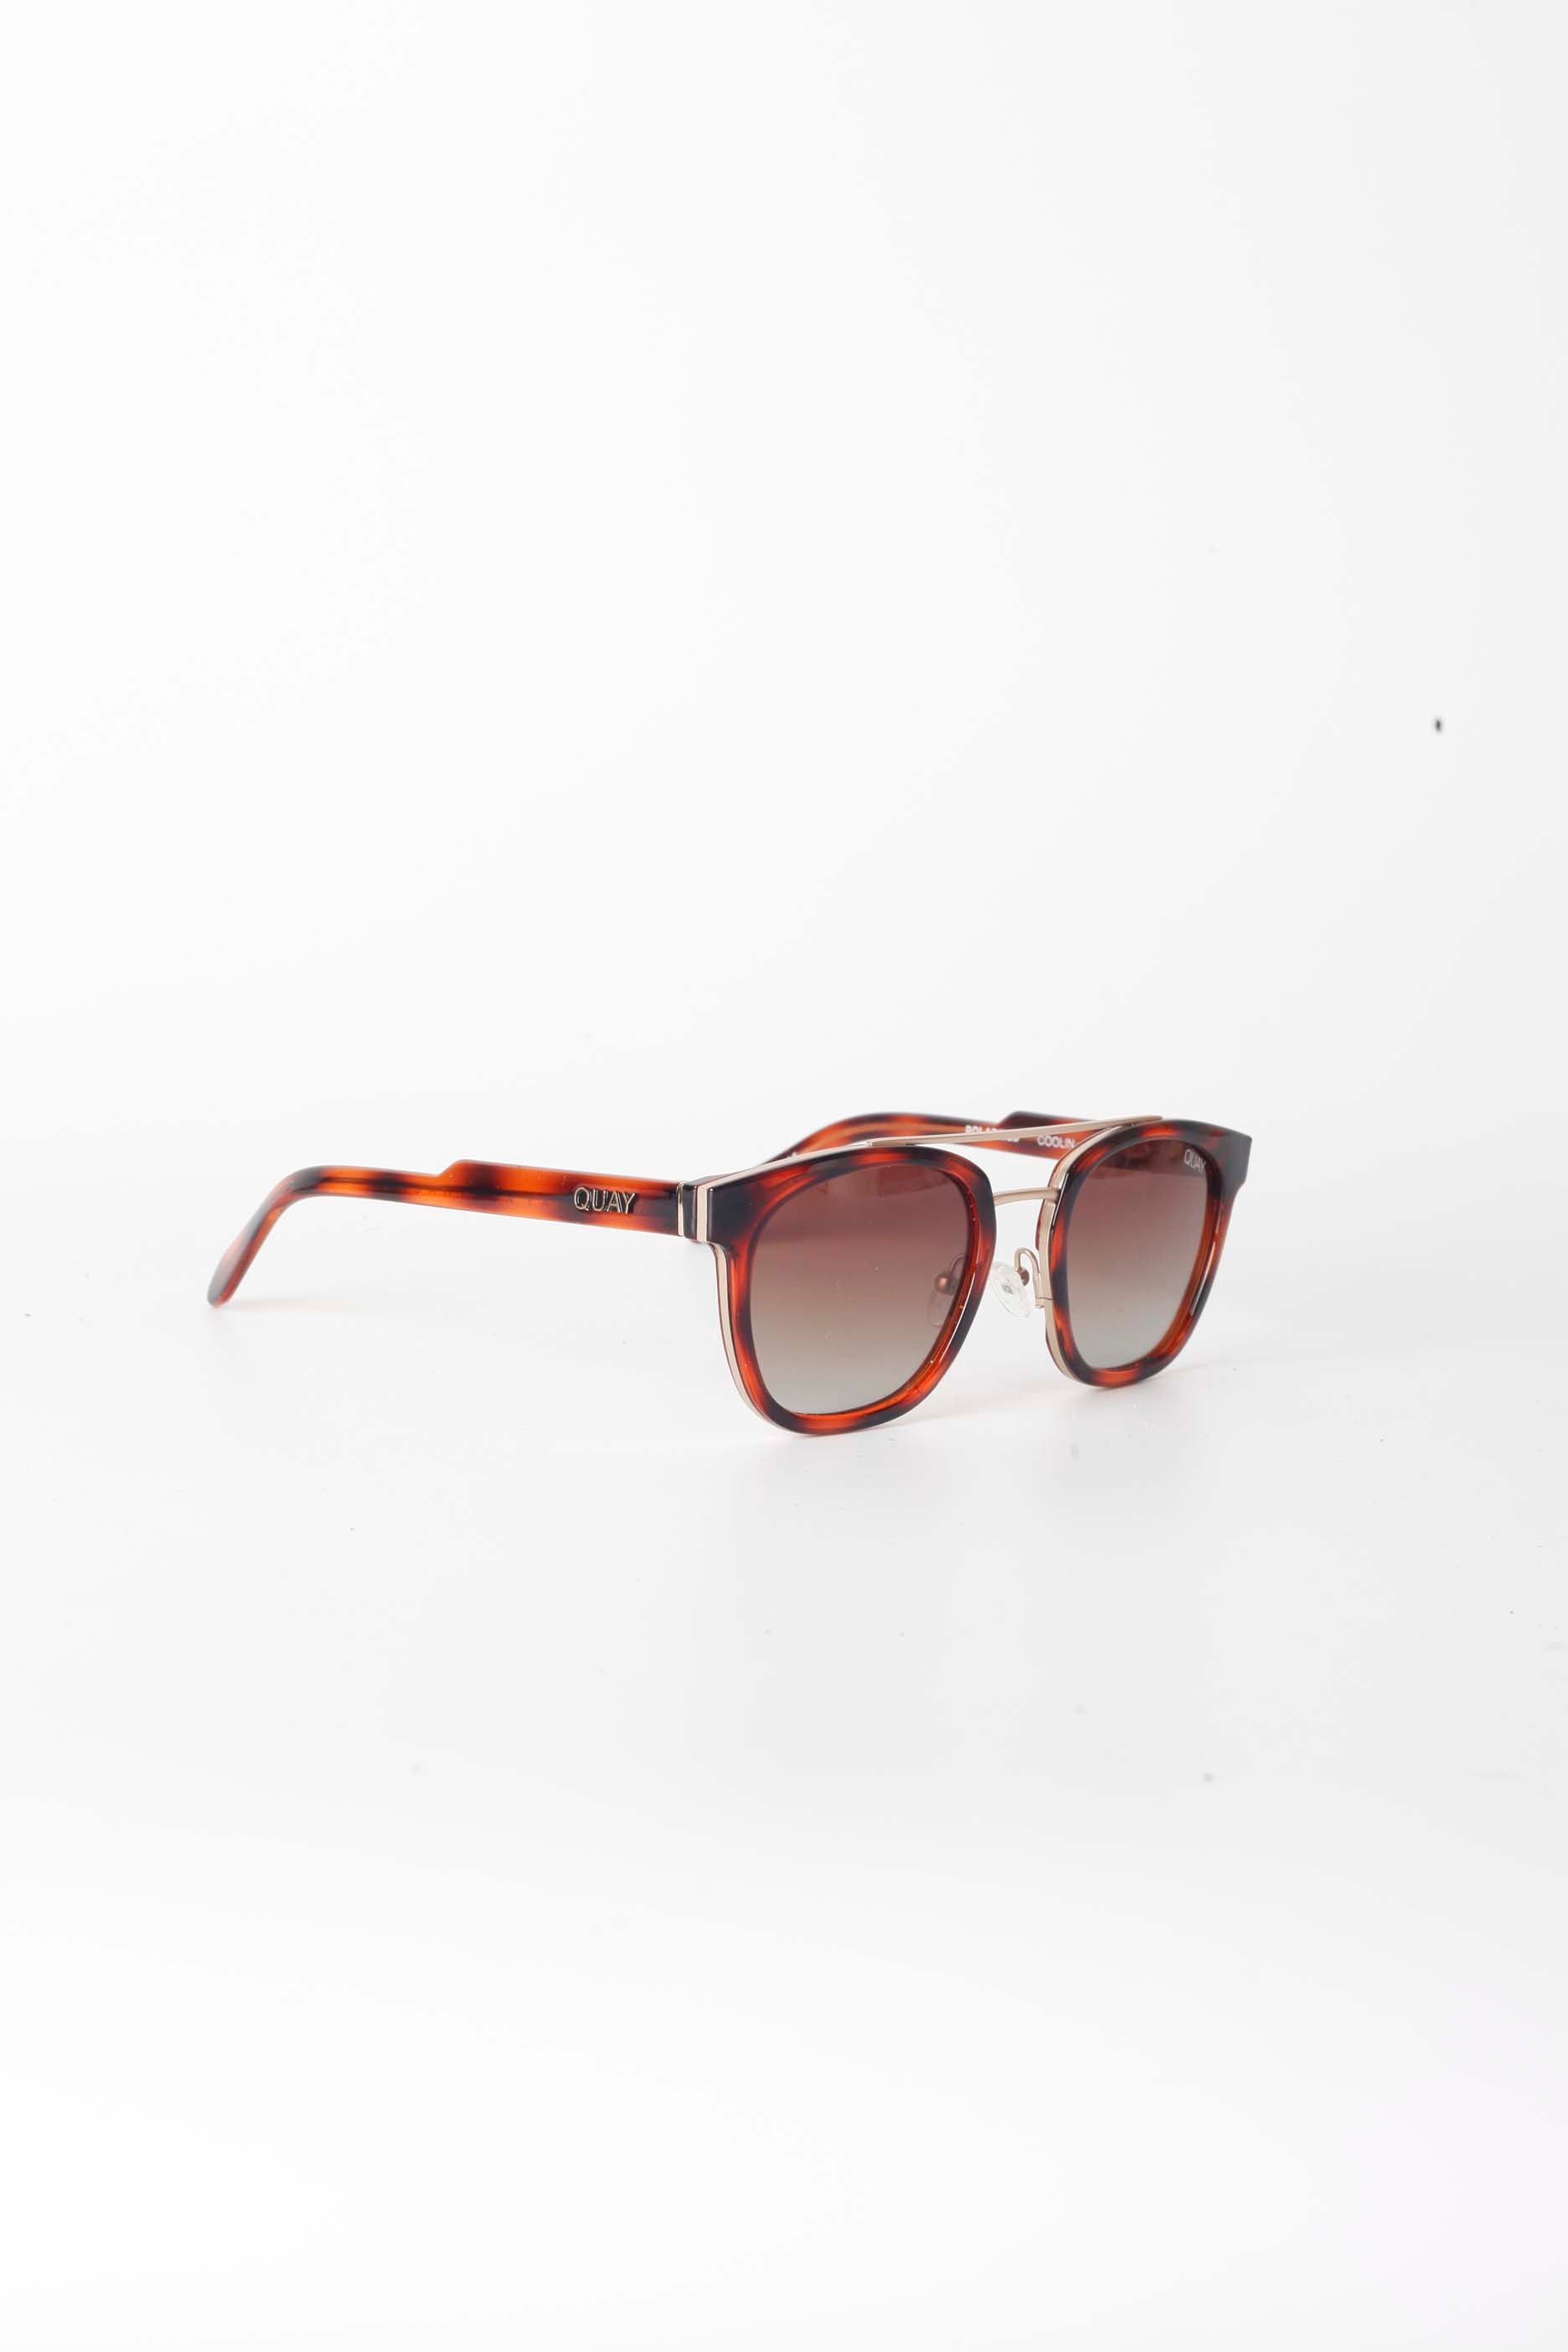 Brown Tint Sunglasses with Tortoise Shell